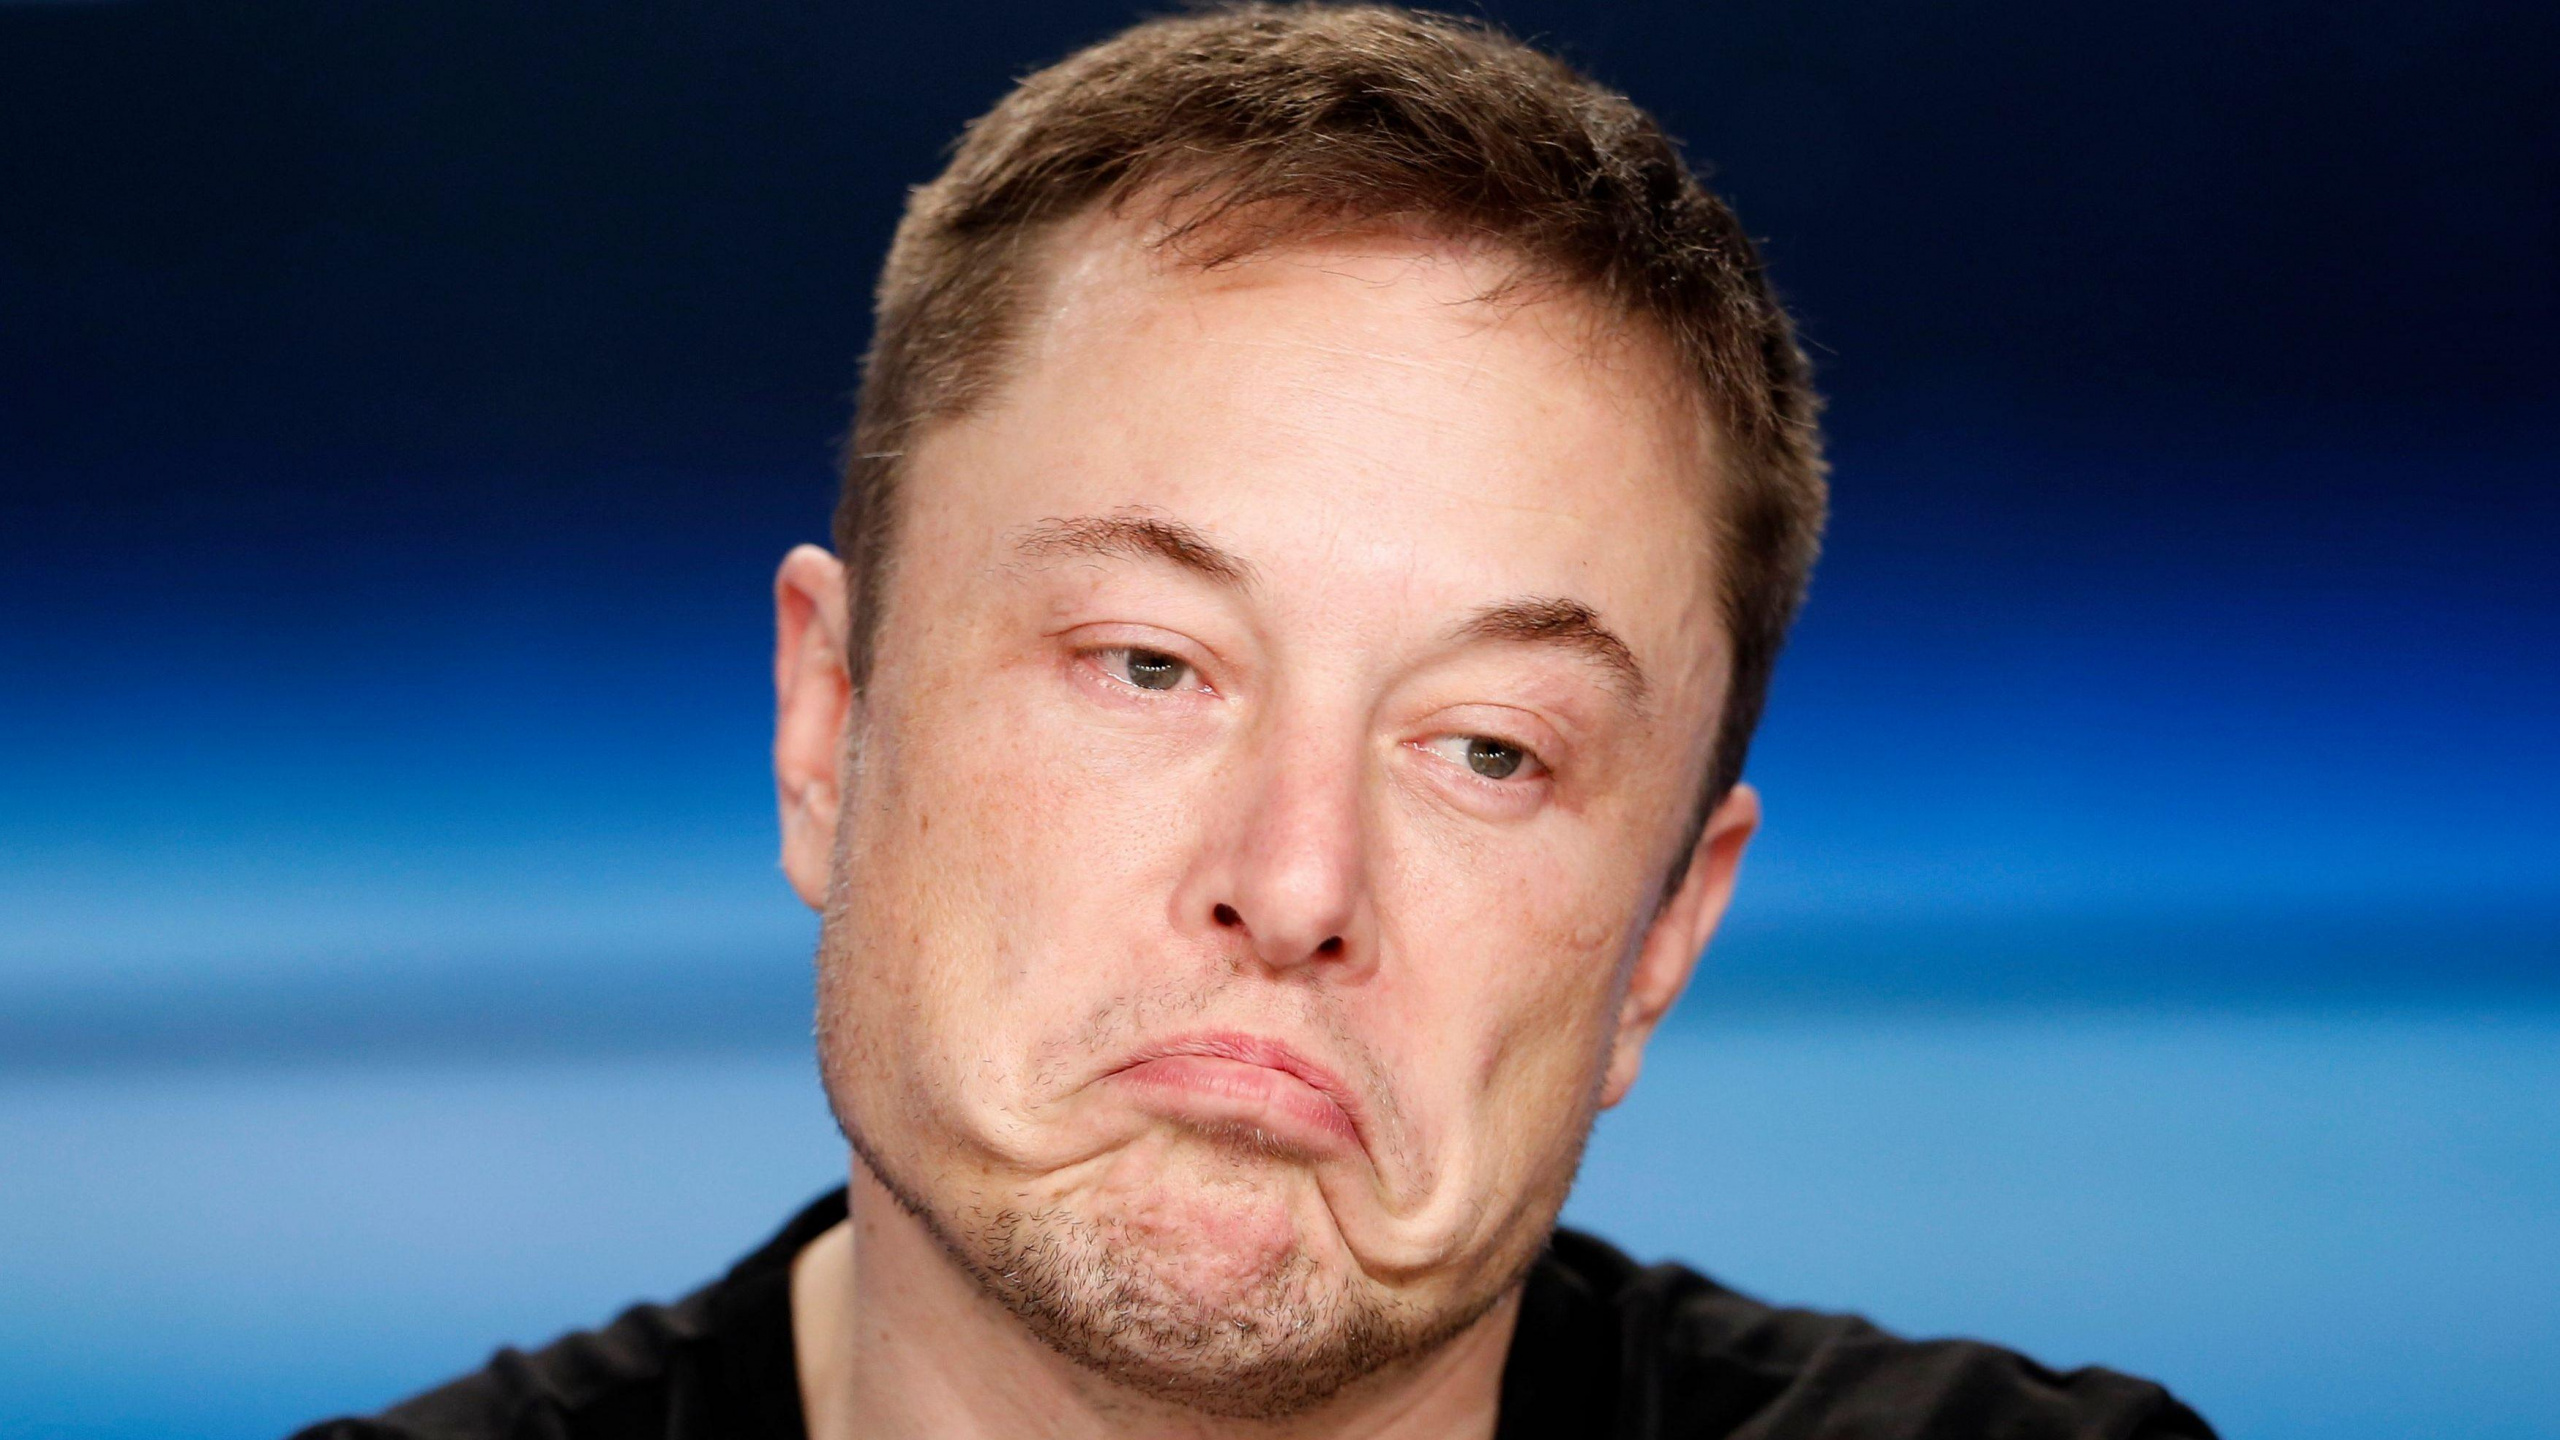 Elon Musk, Tham Luang Cave Rescue, Face, Forehead, Chin. Wallpaper in 2560x1440 Resolution